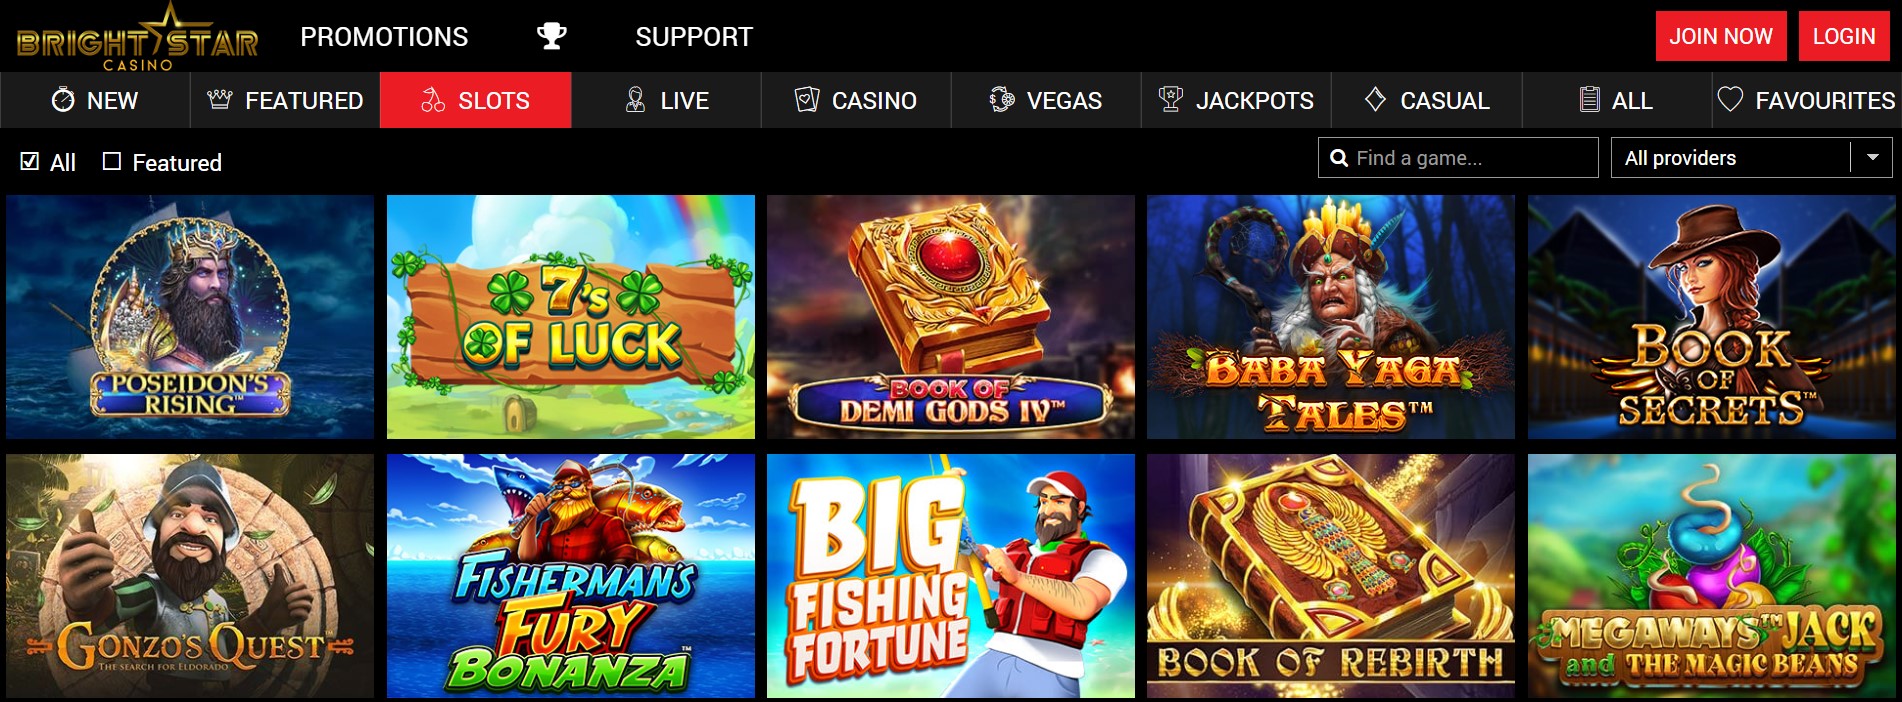 BrightStar Casino Games Review